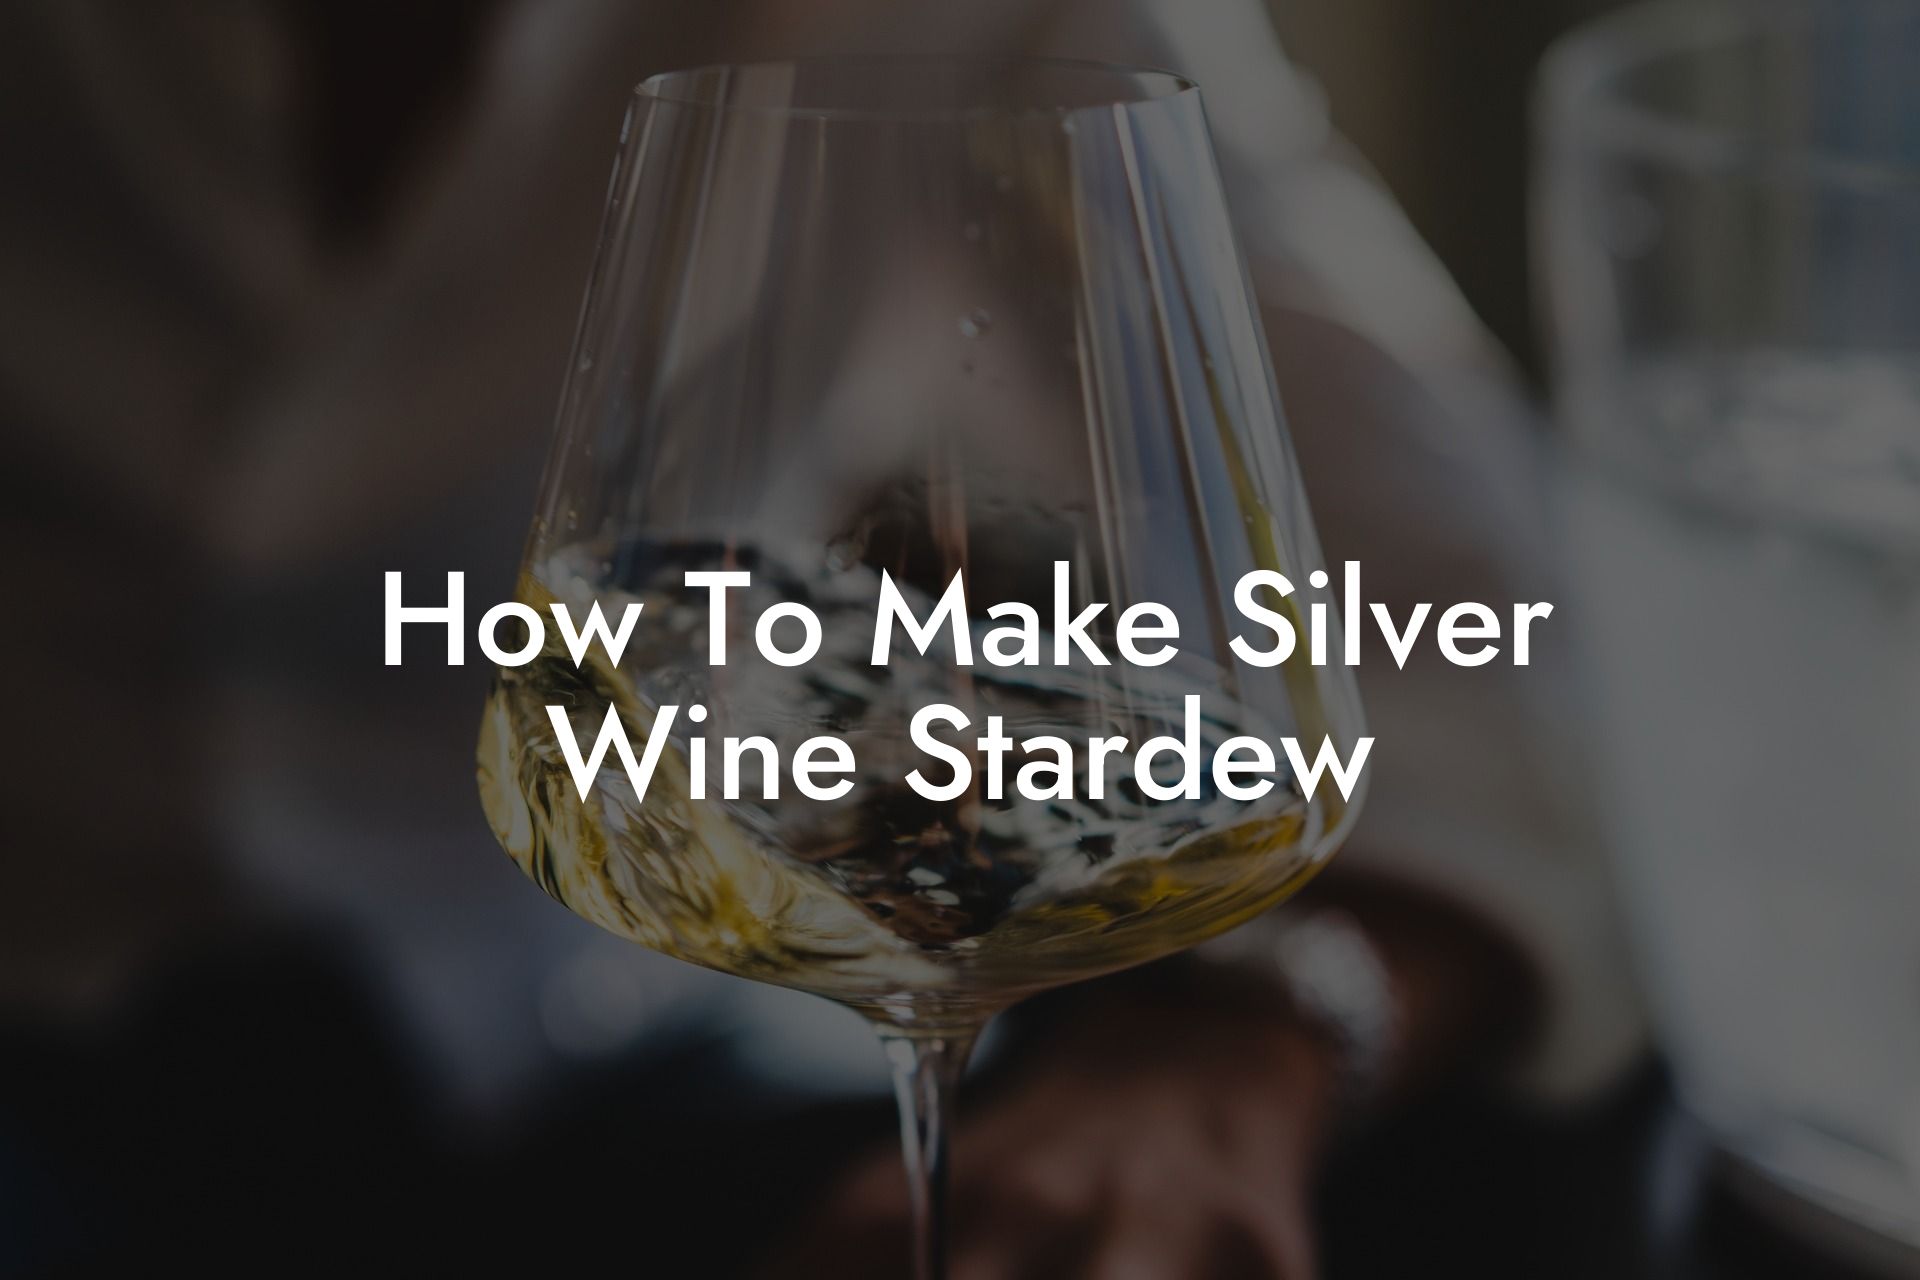 How To Make Silver Wine Stardew